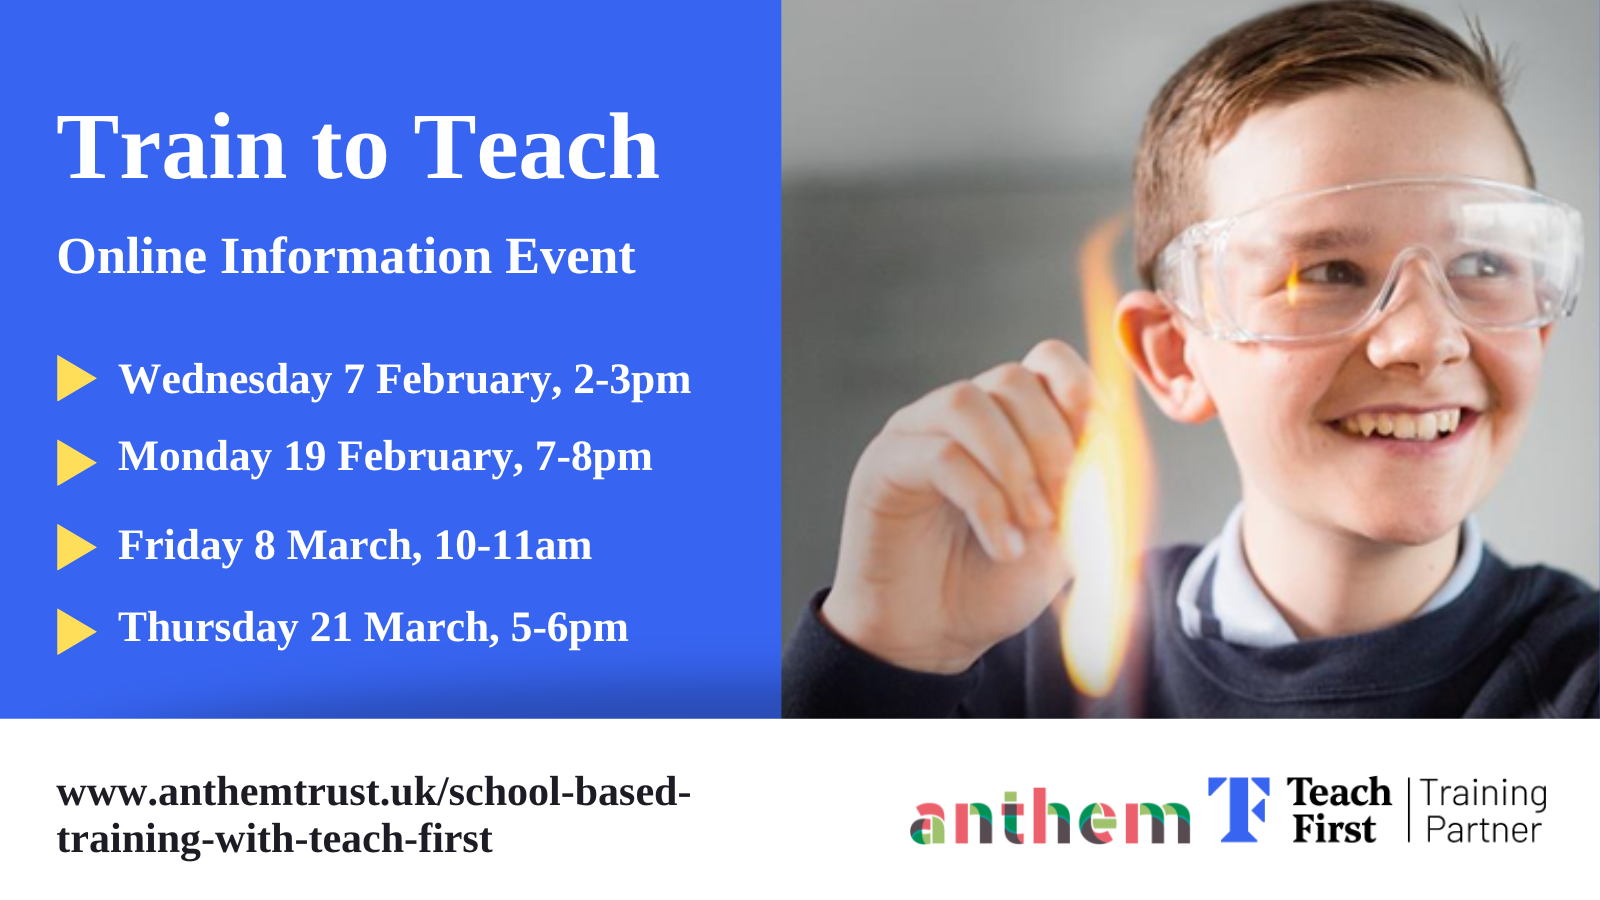 Train to teach information events